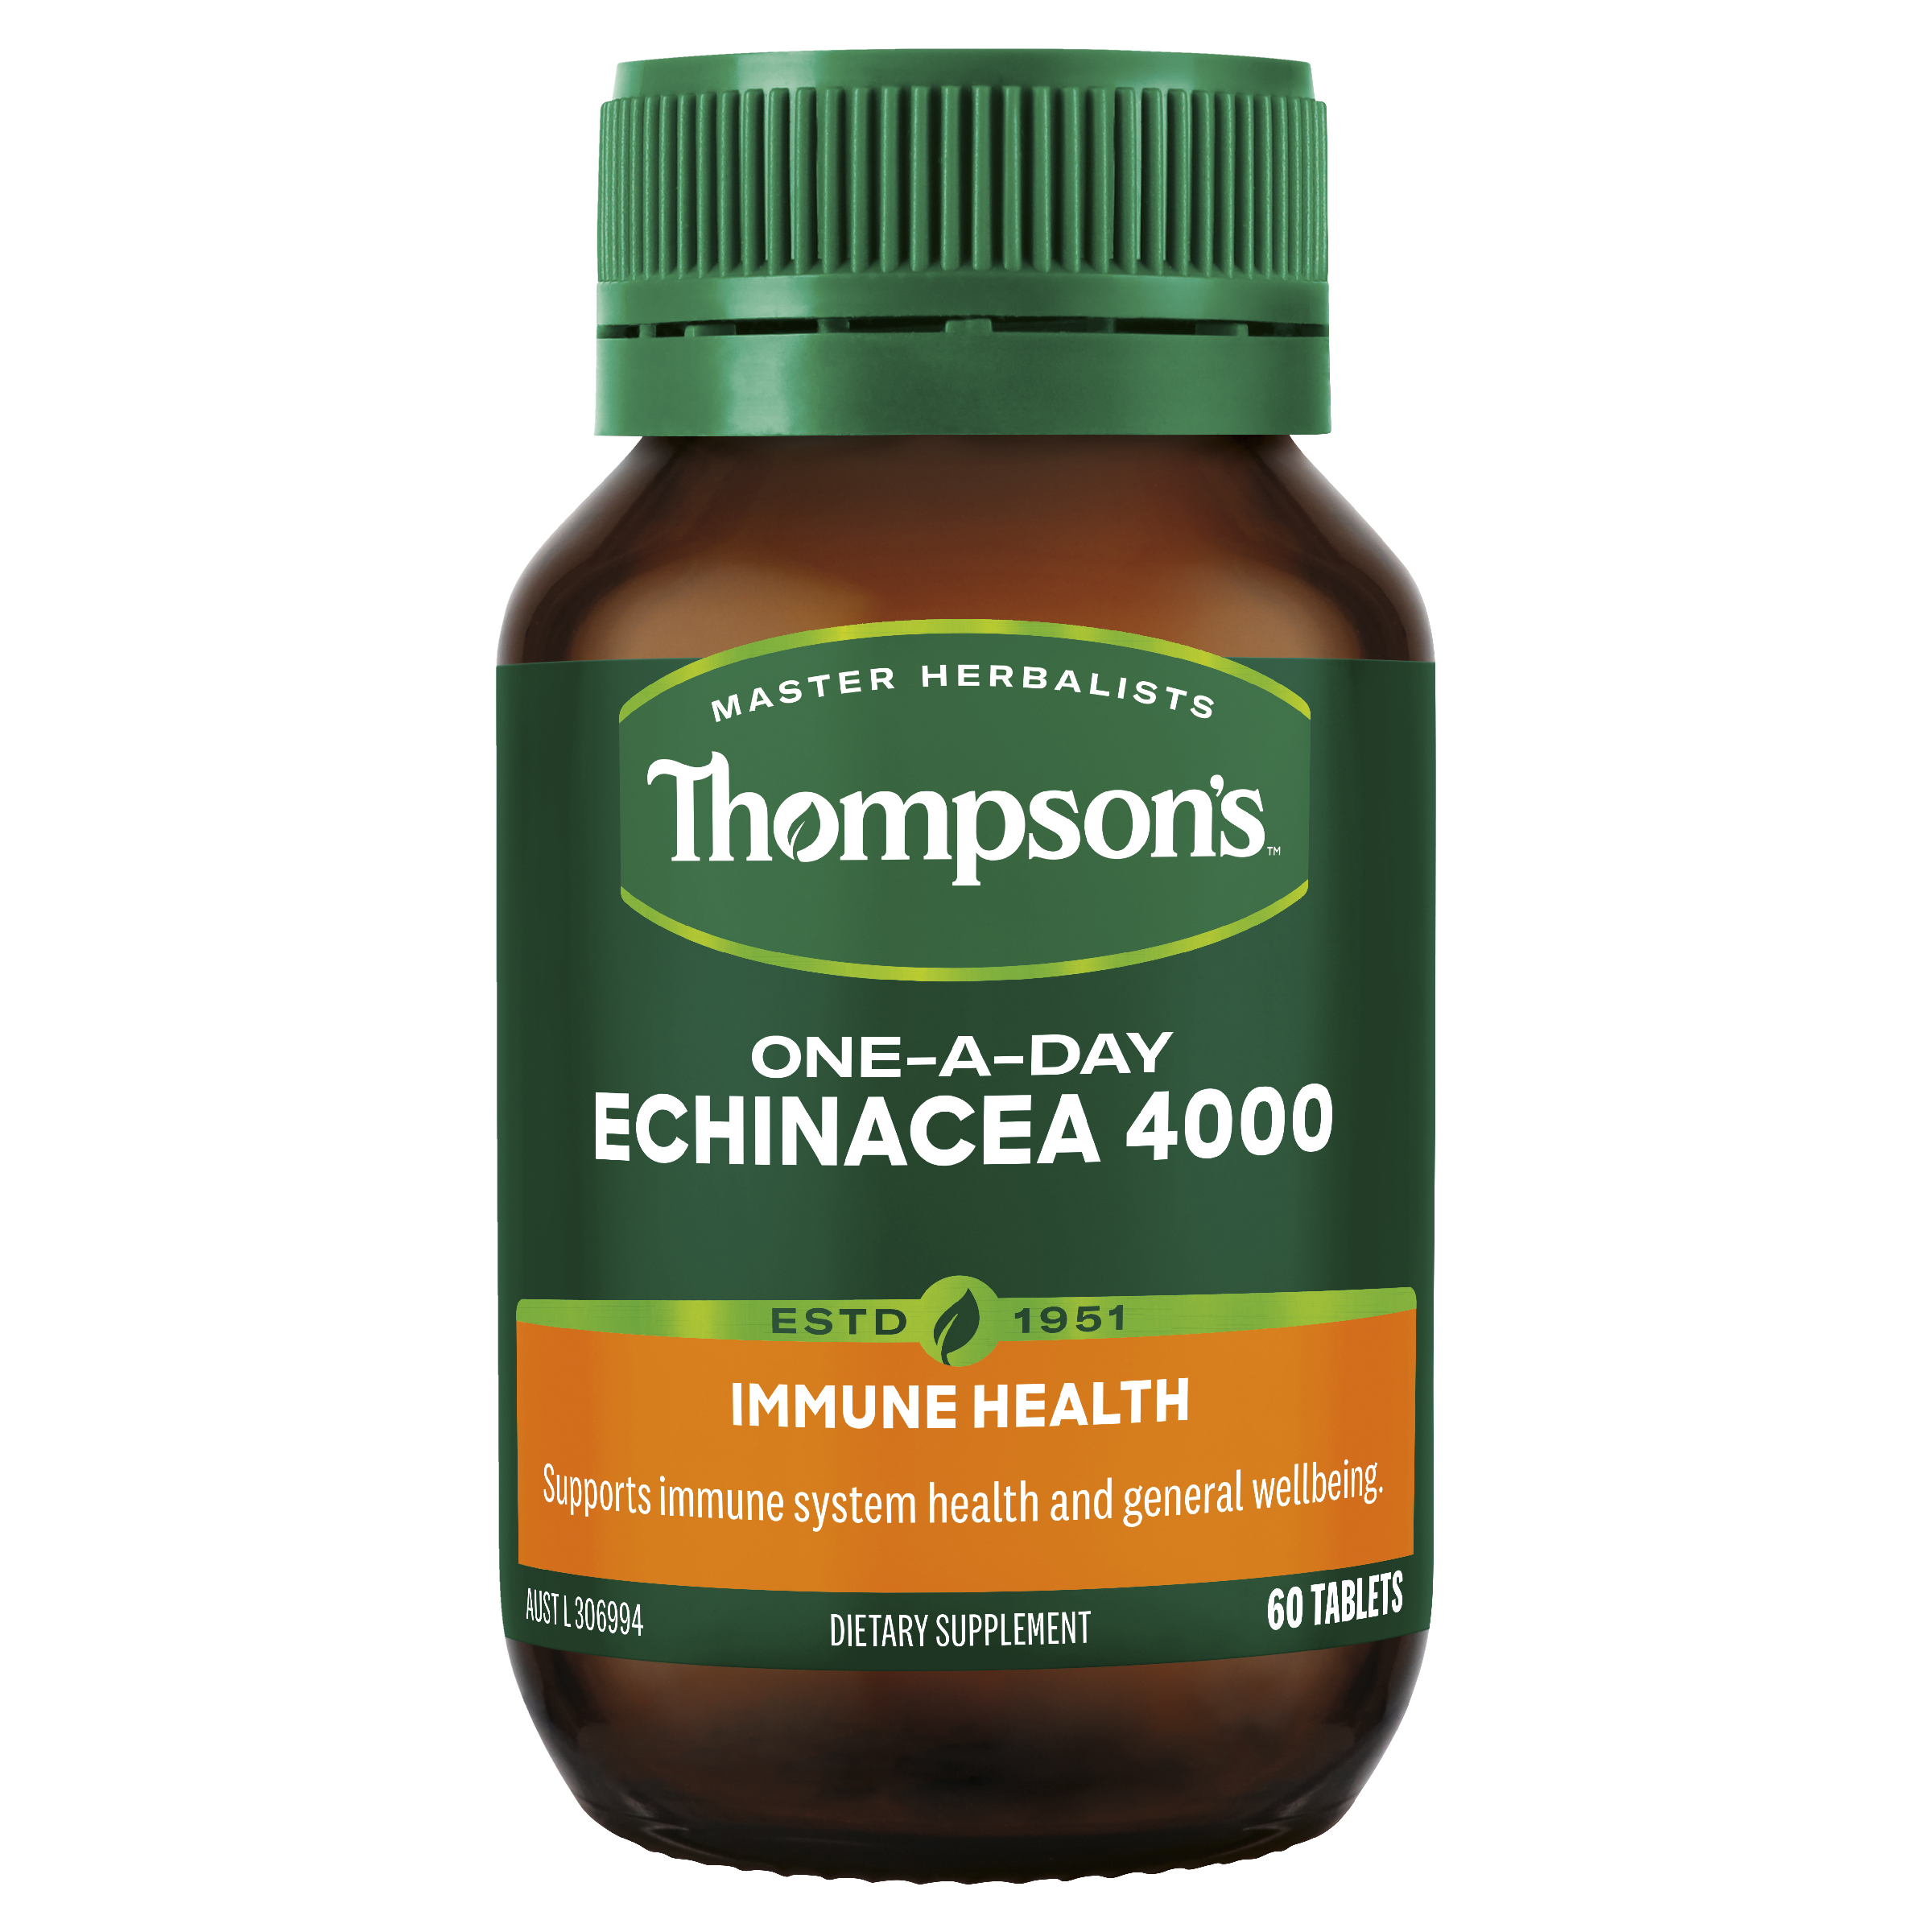 Thompsons One-A-Day Echinacea 4000 60 Tablets